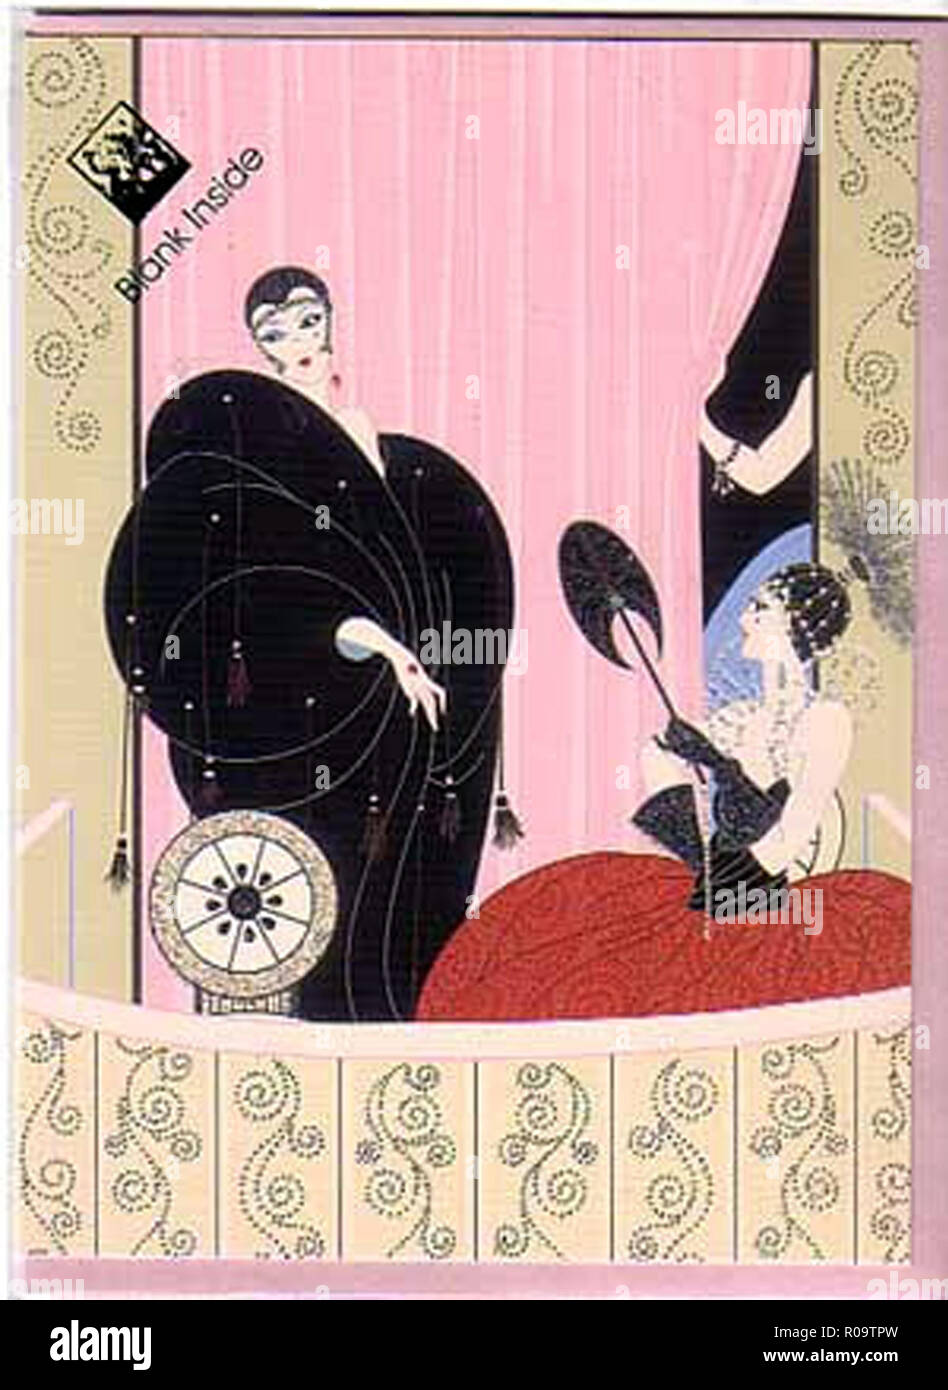 Vintage Costume Design Illustration In An Art Deco Style Stock